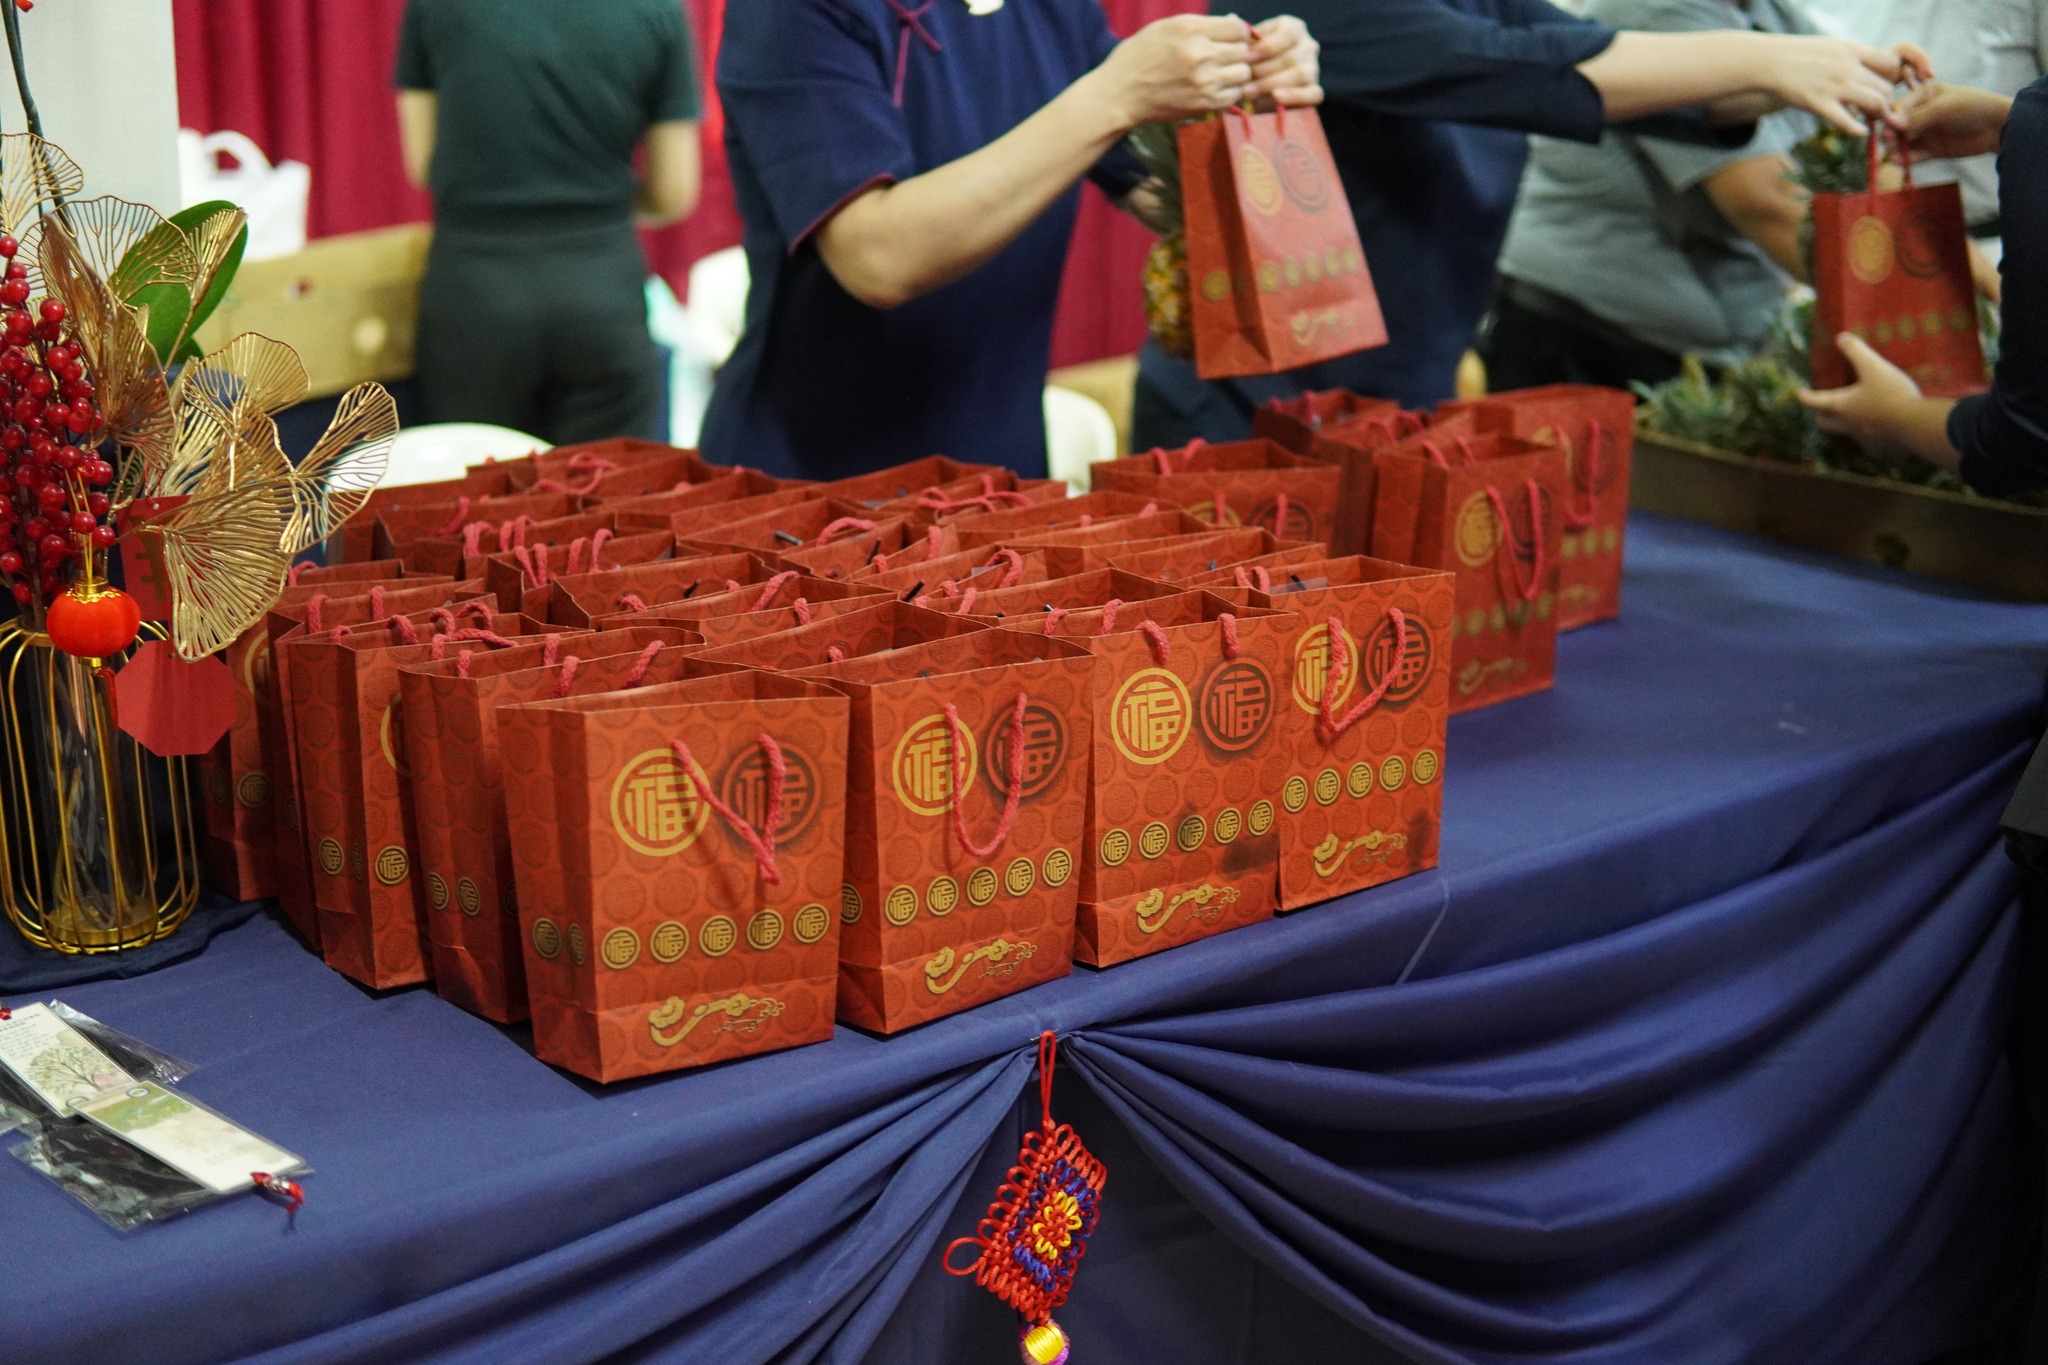 Tikoys were given to all the attendees. A symbol of luck and prosperity.【Photo by Tzu Chi Davao】